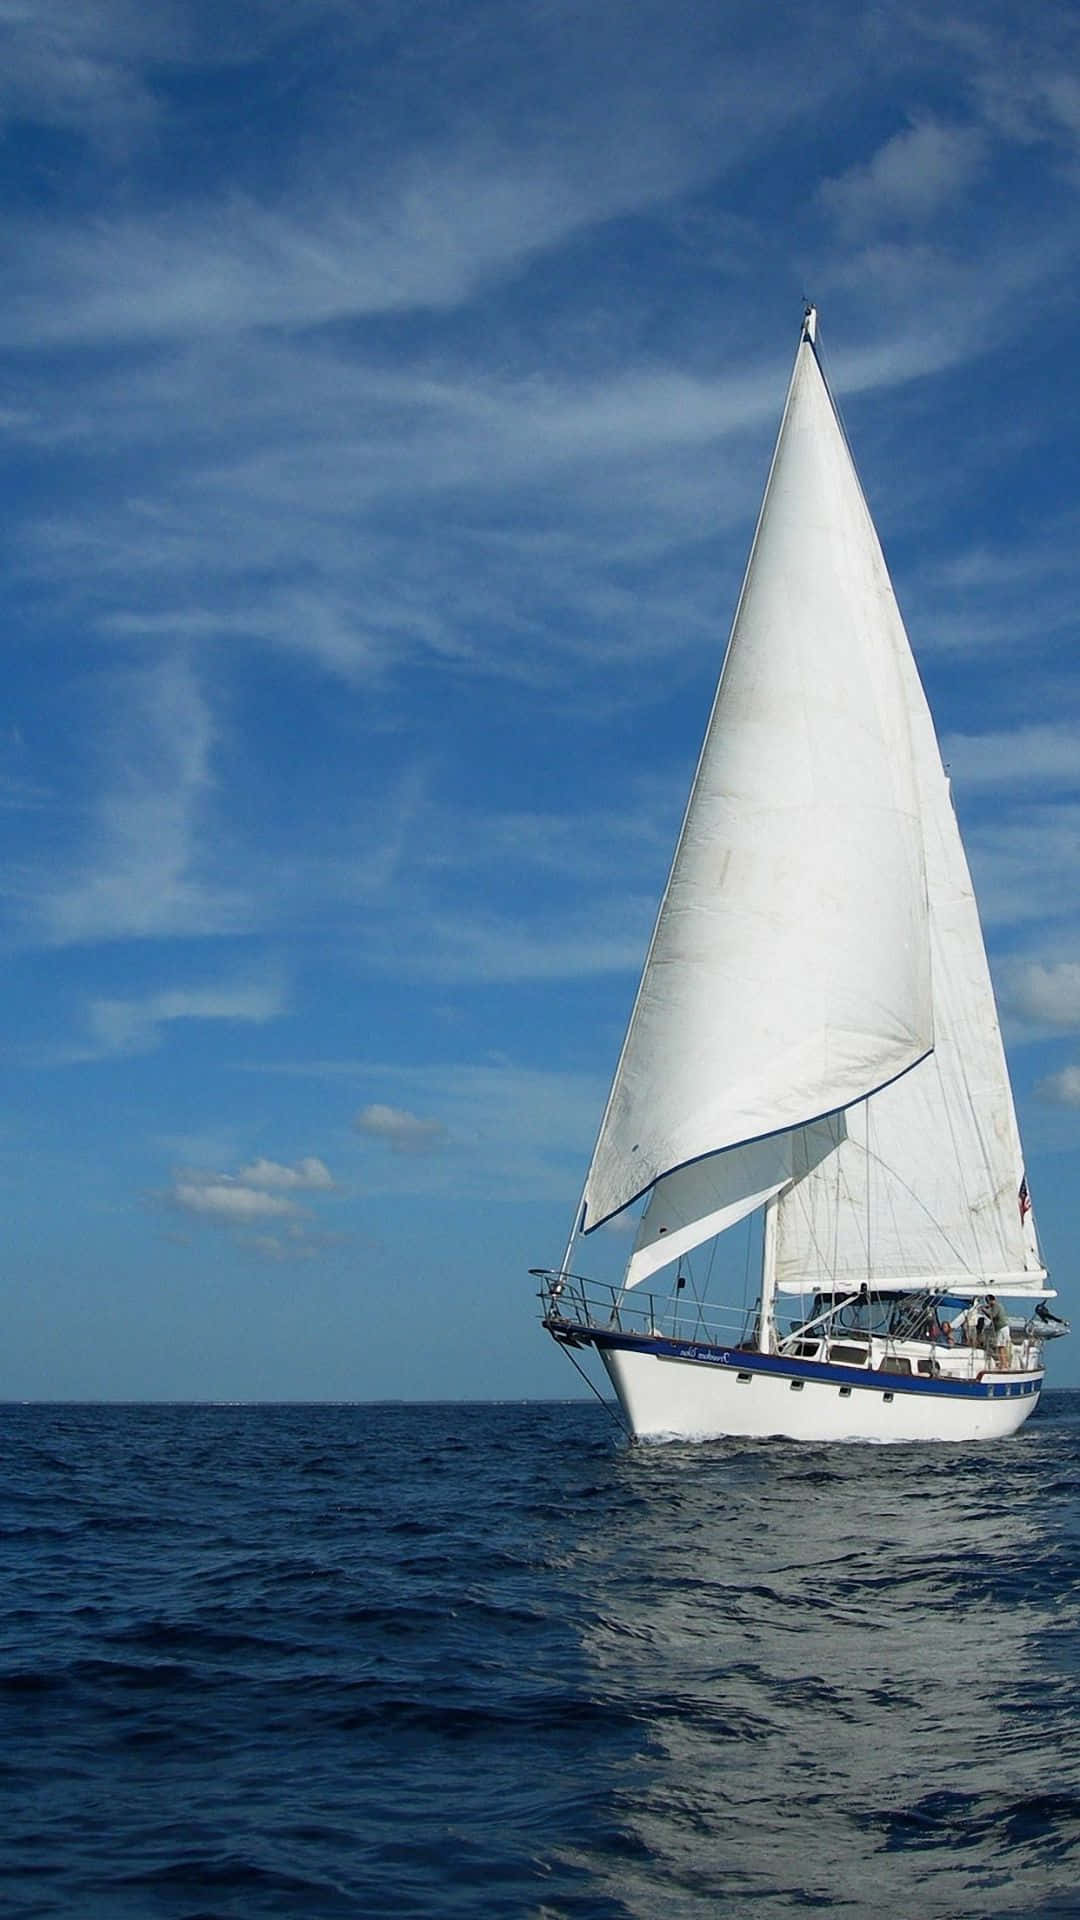 Enjoying the calming atmosphere of the open sea with a Sailboat